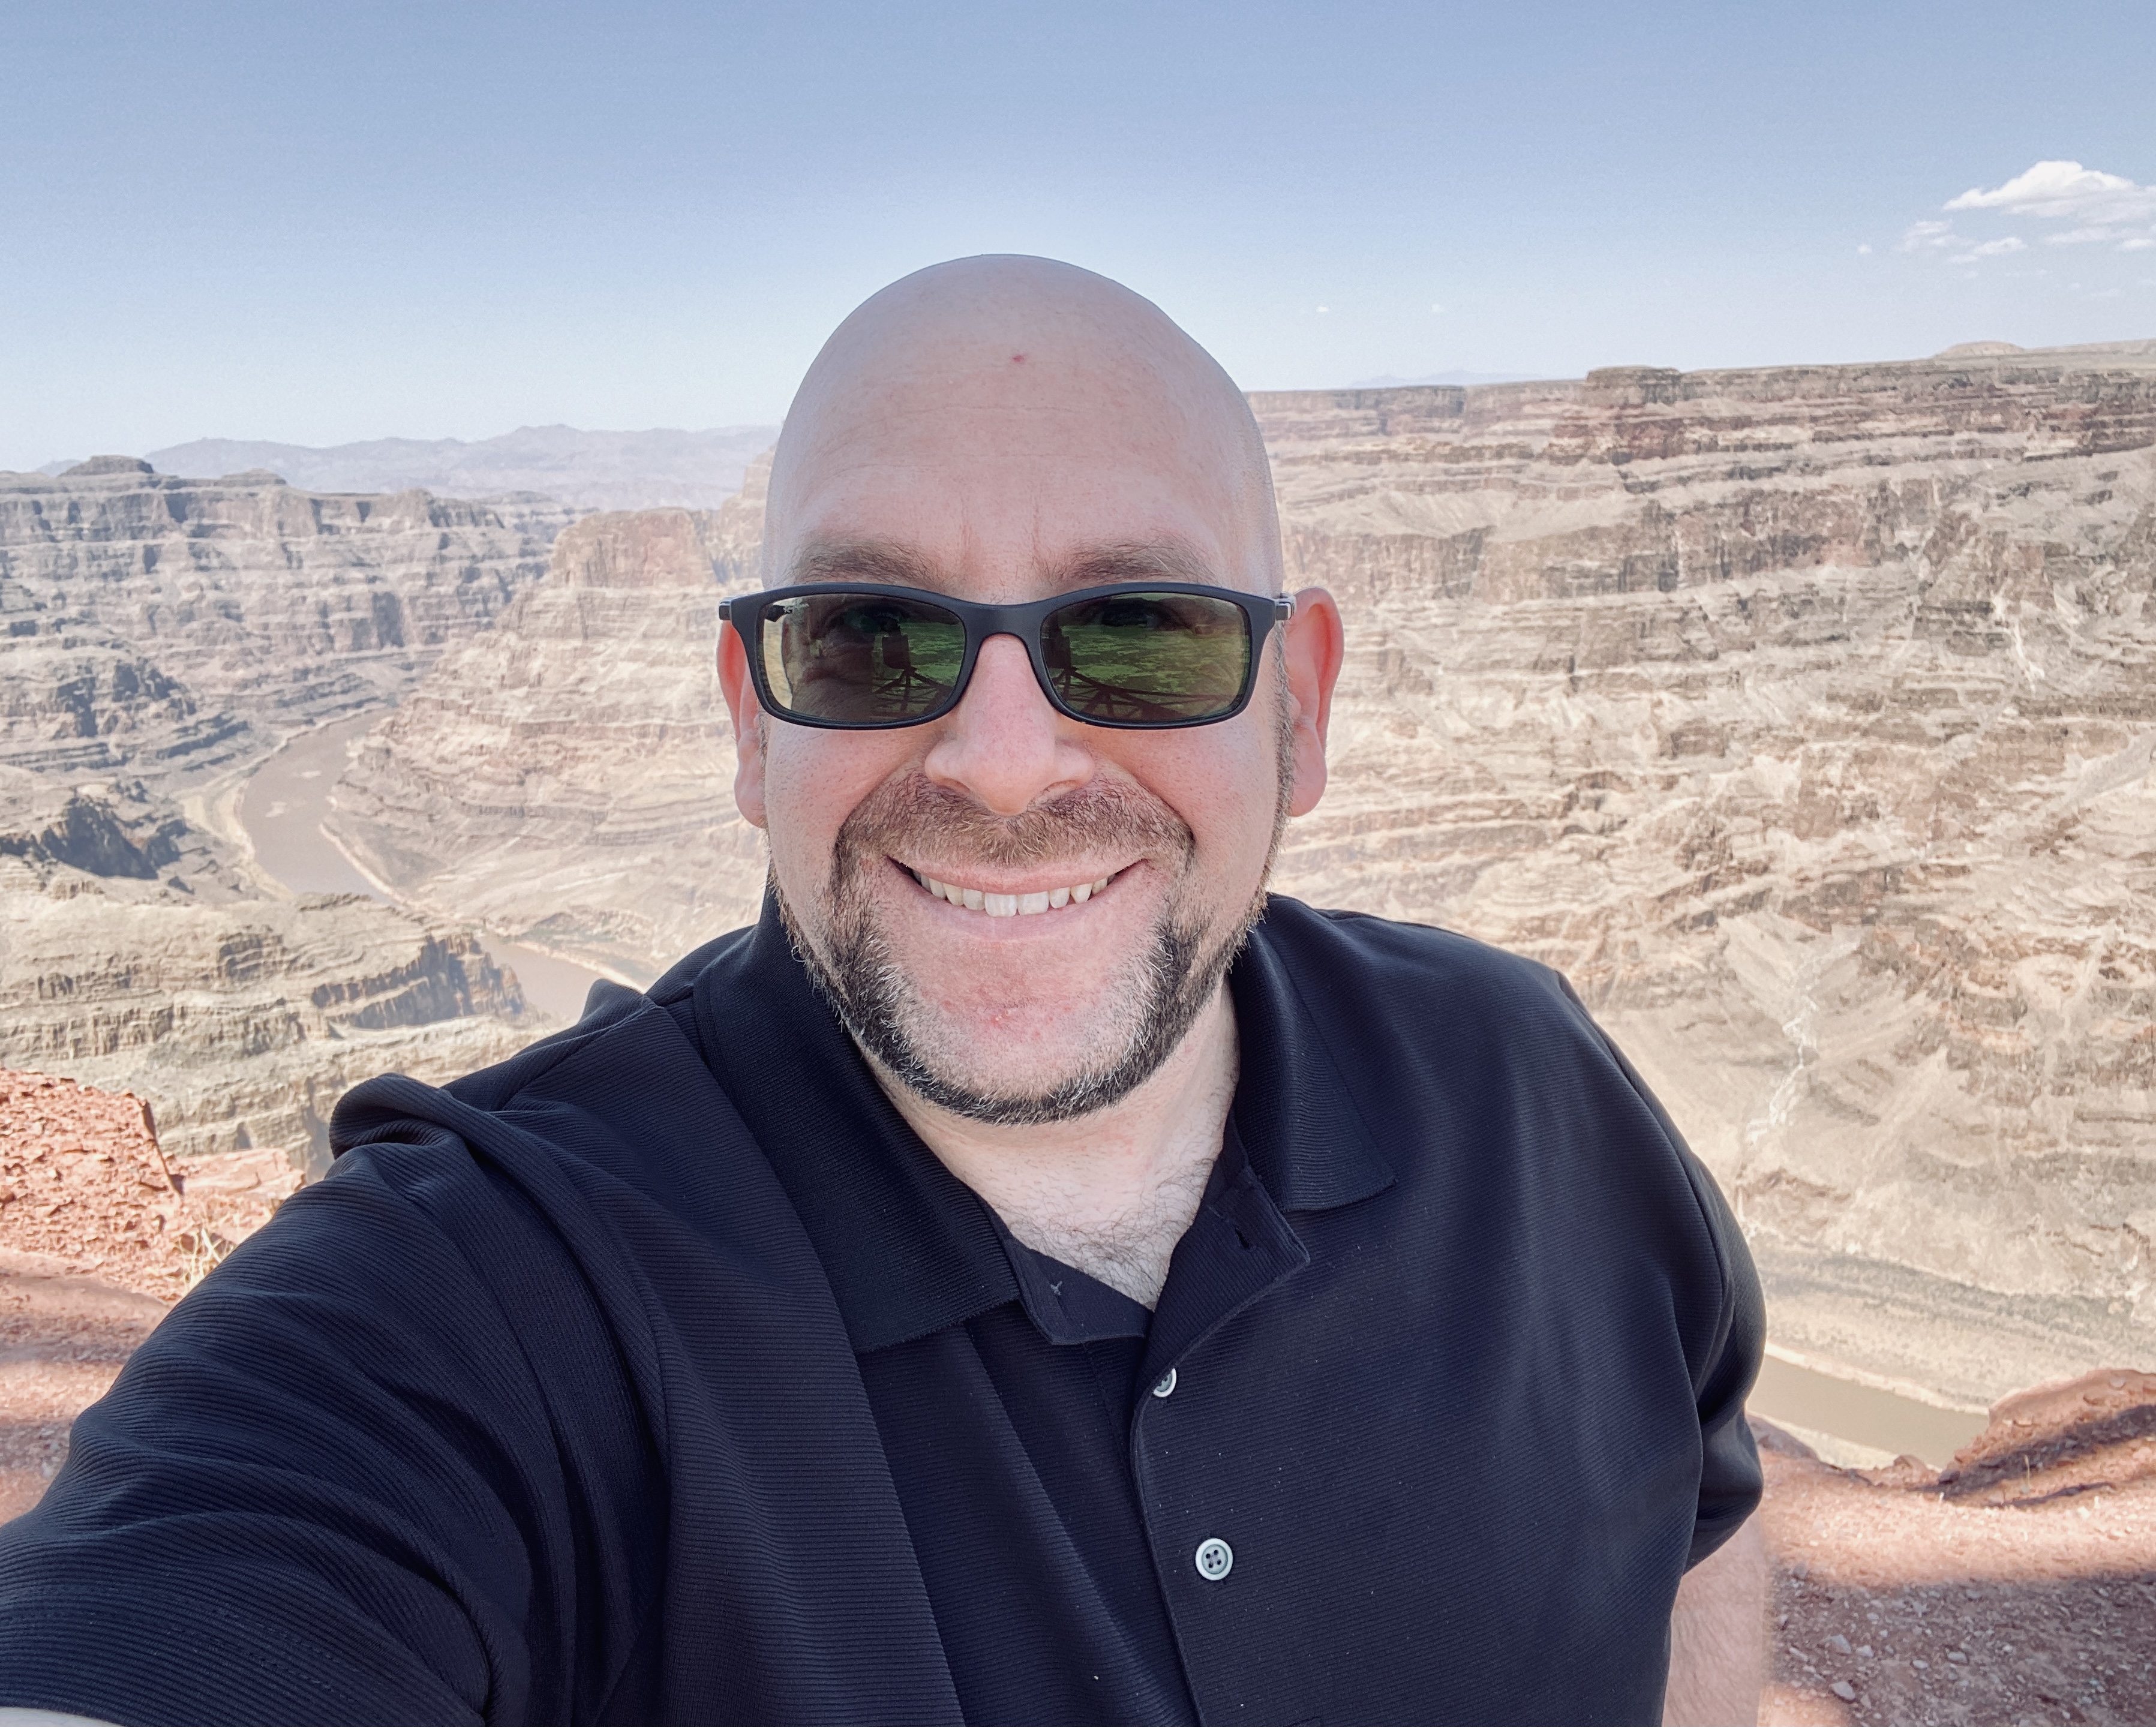 Travel Stories: Grand Canyon West and Las Vegas